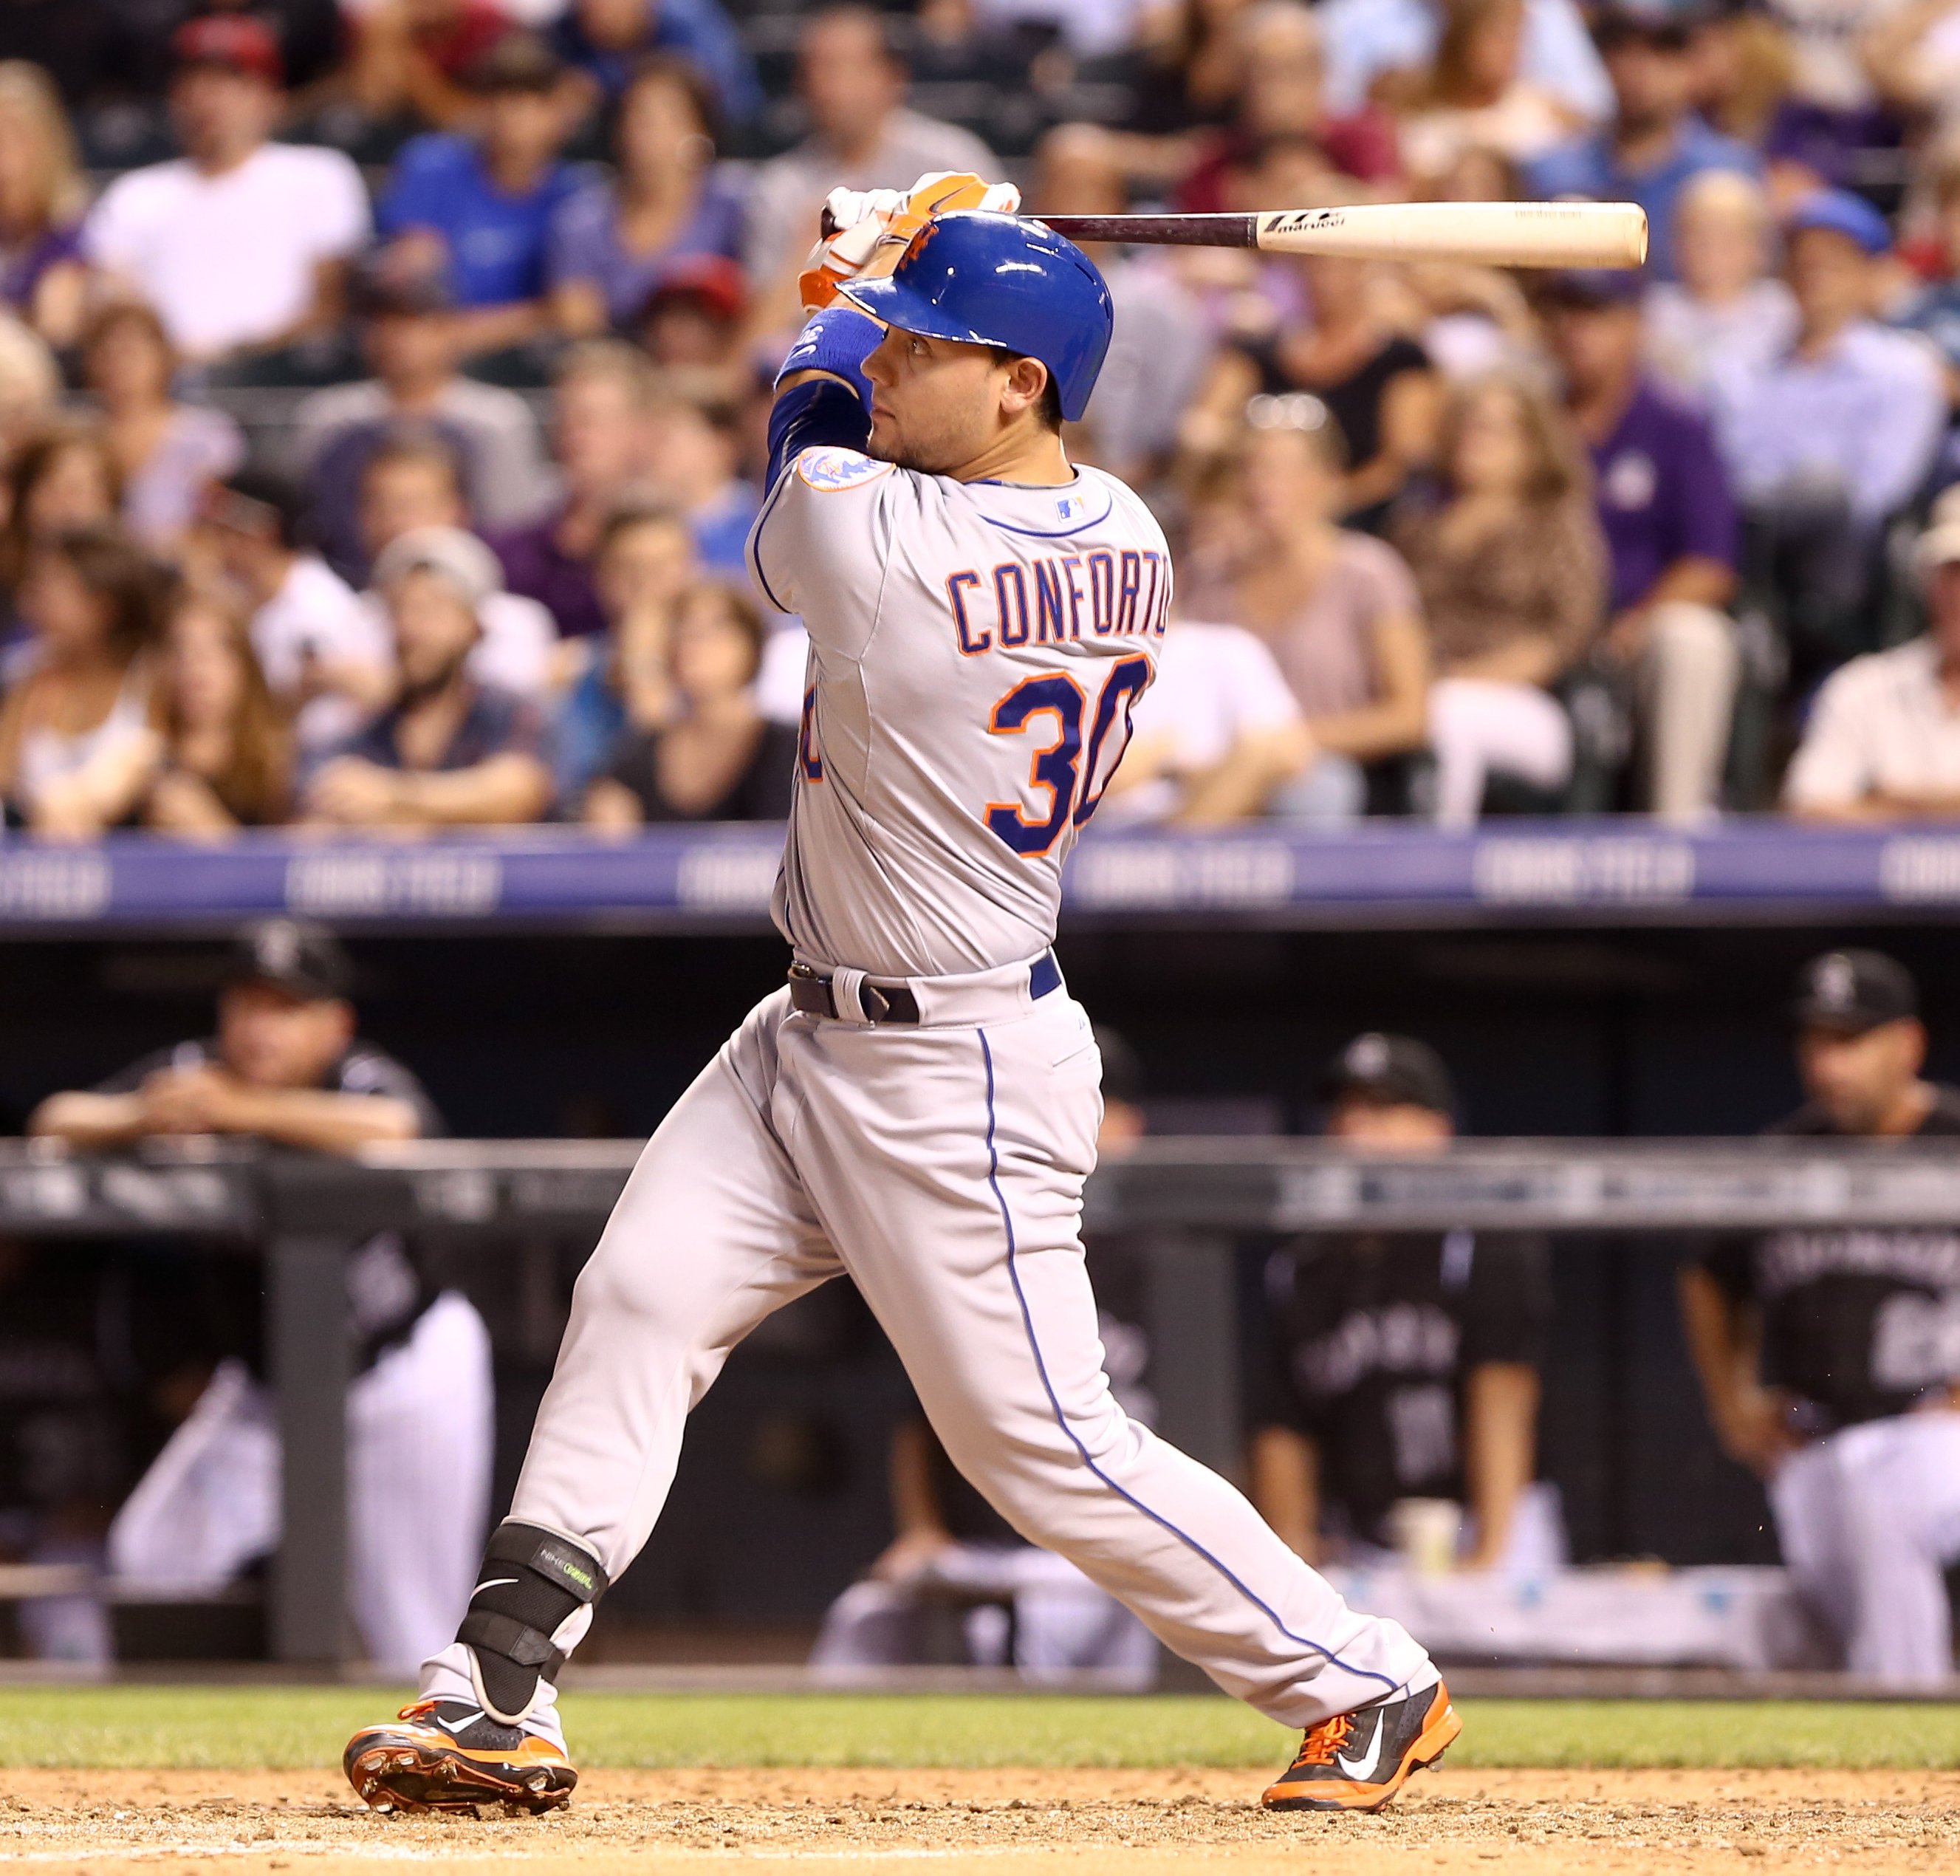 Michael Conforto swings at a pitch during a game against the Colorado Rockies at Coors Field on August 21, 2015 | Photo: Shutterstock